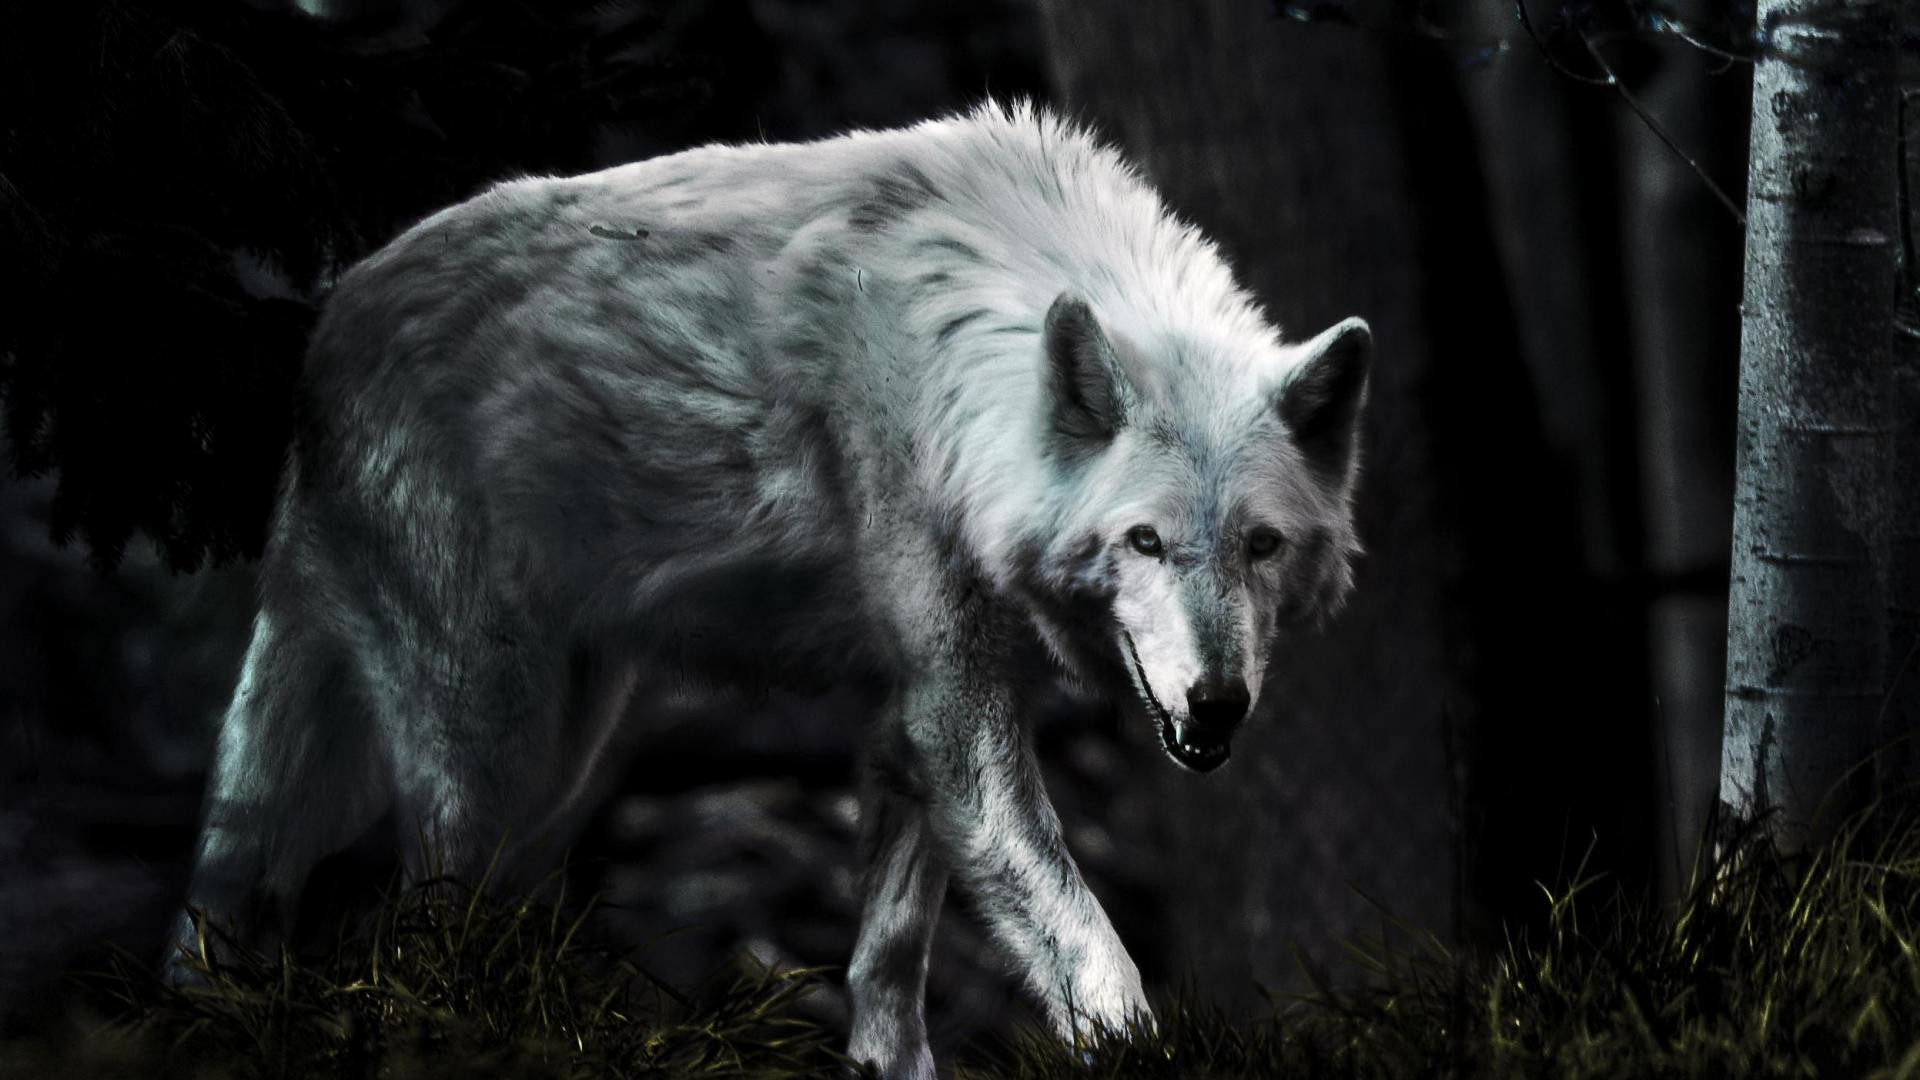 1920x1080 Dark wolf - (#91142) - High Quality and Resolution Wallpapers on .